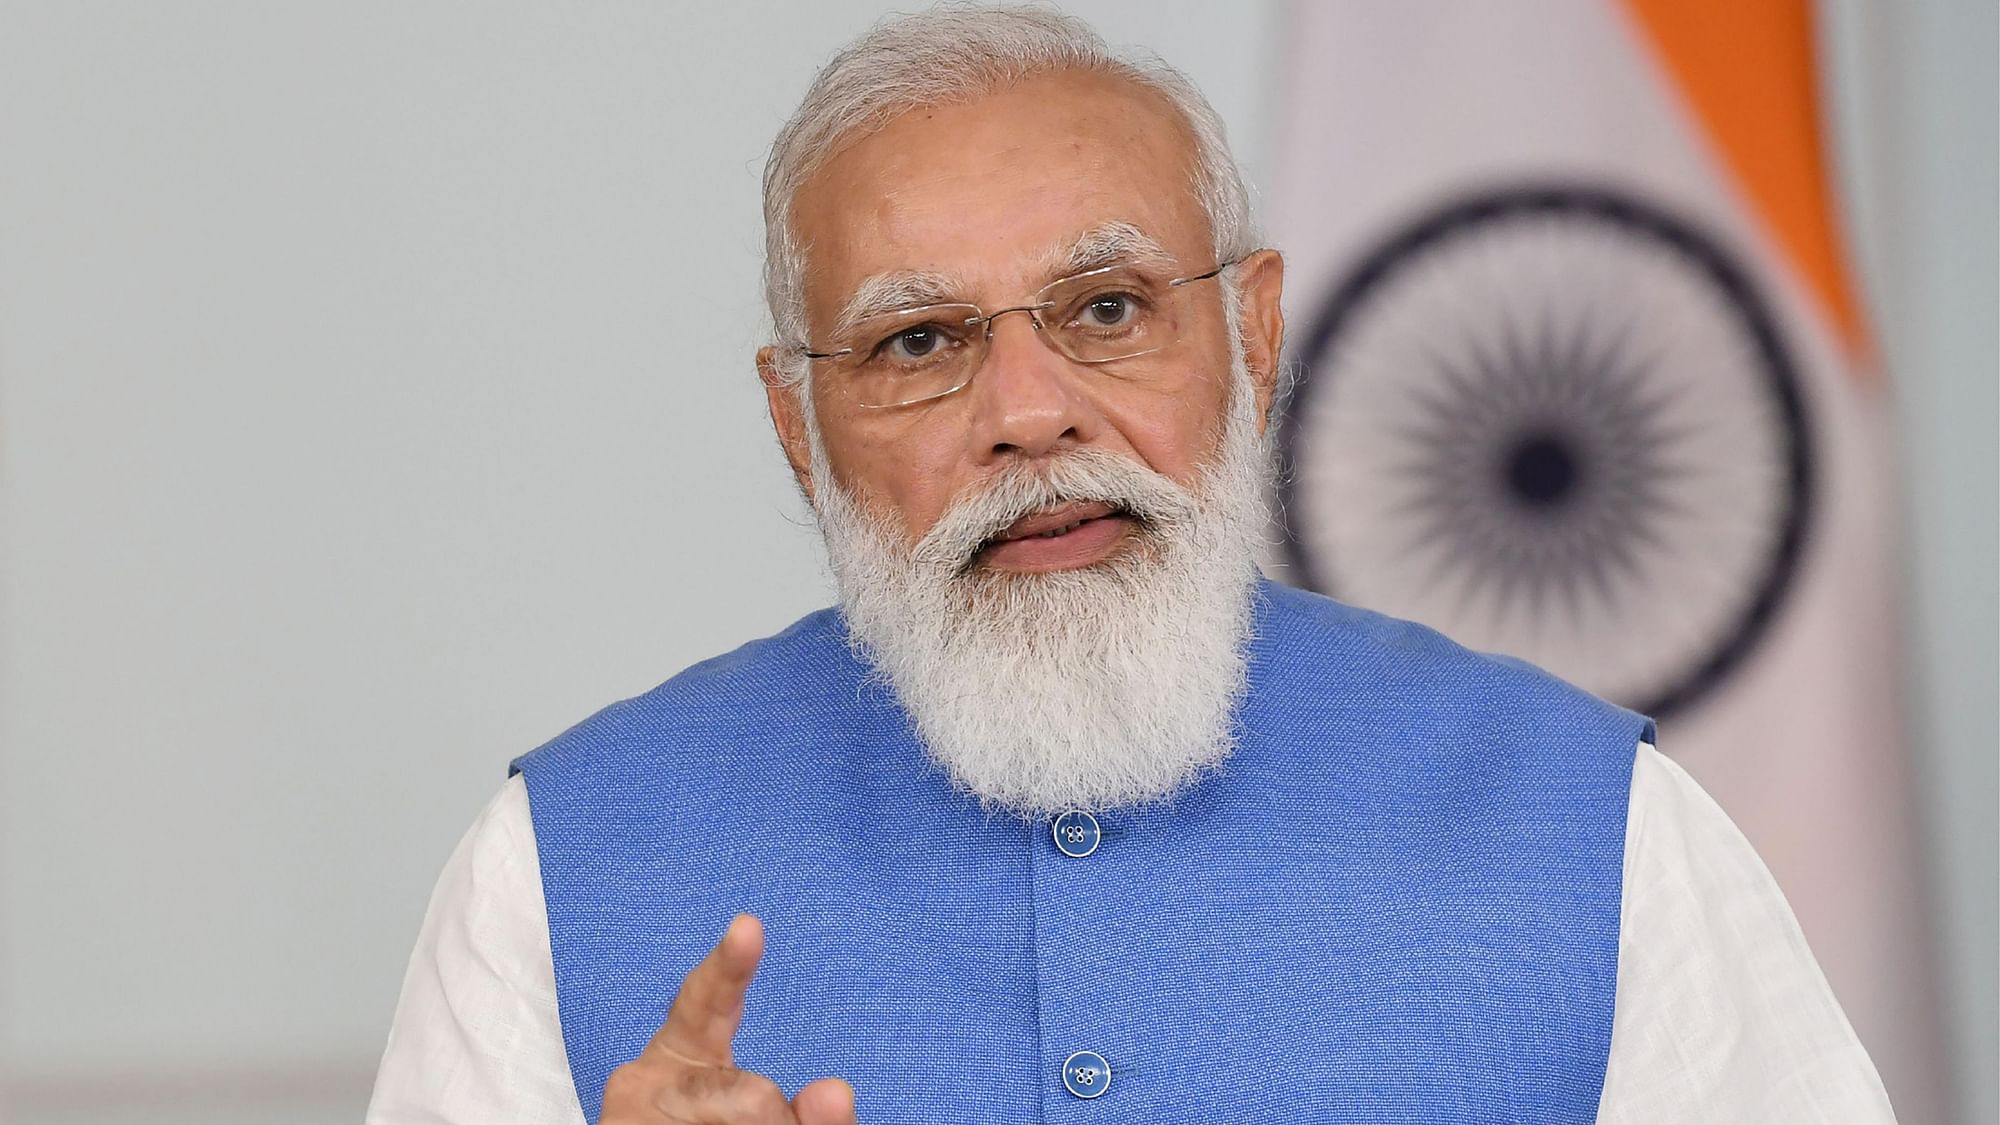 Aim Is To Make Cities Garbage-Free&#39;: PM Modi Launches Swachh Bharat Mission 2.0